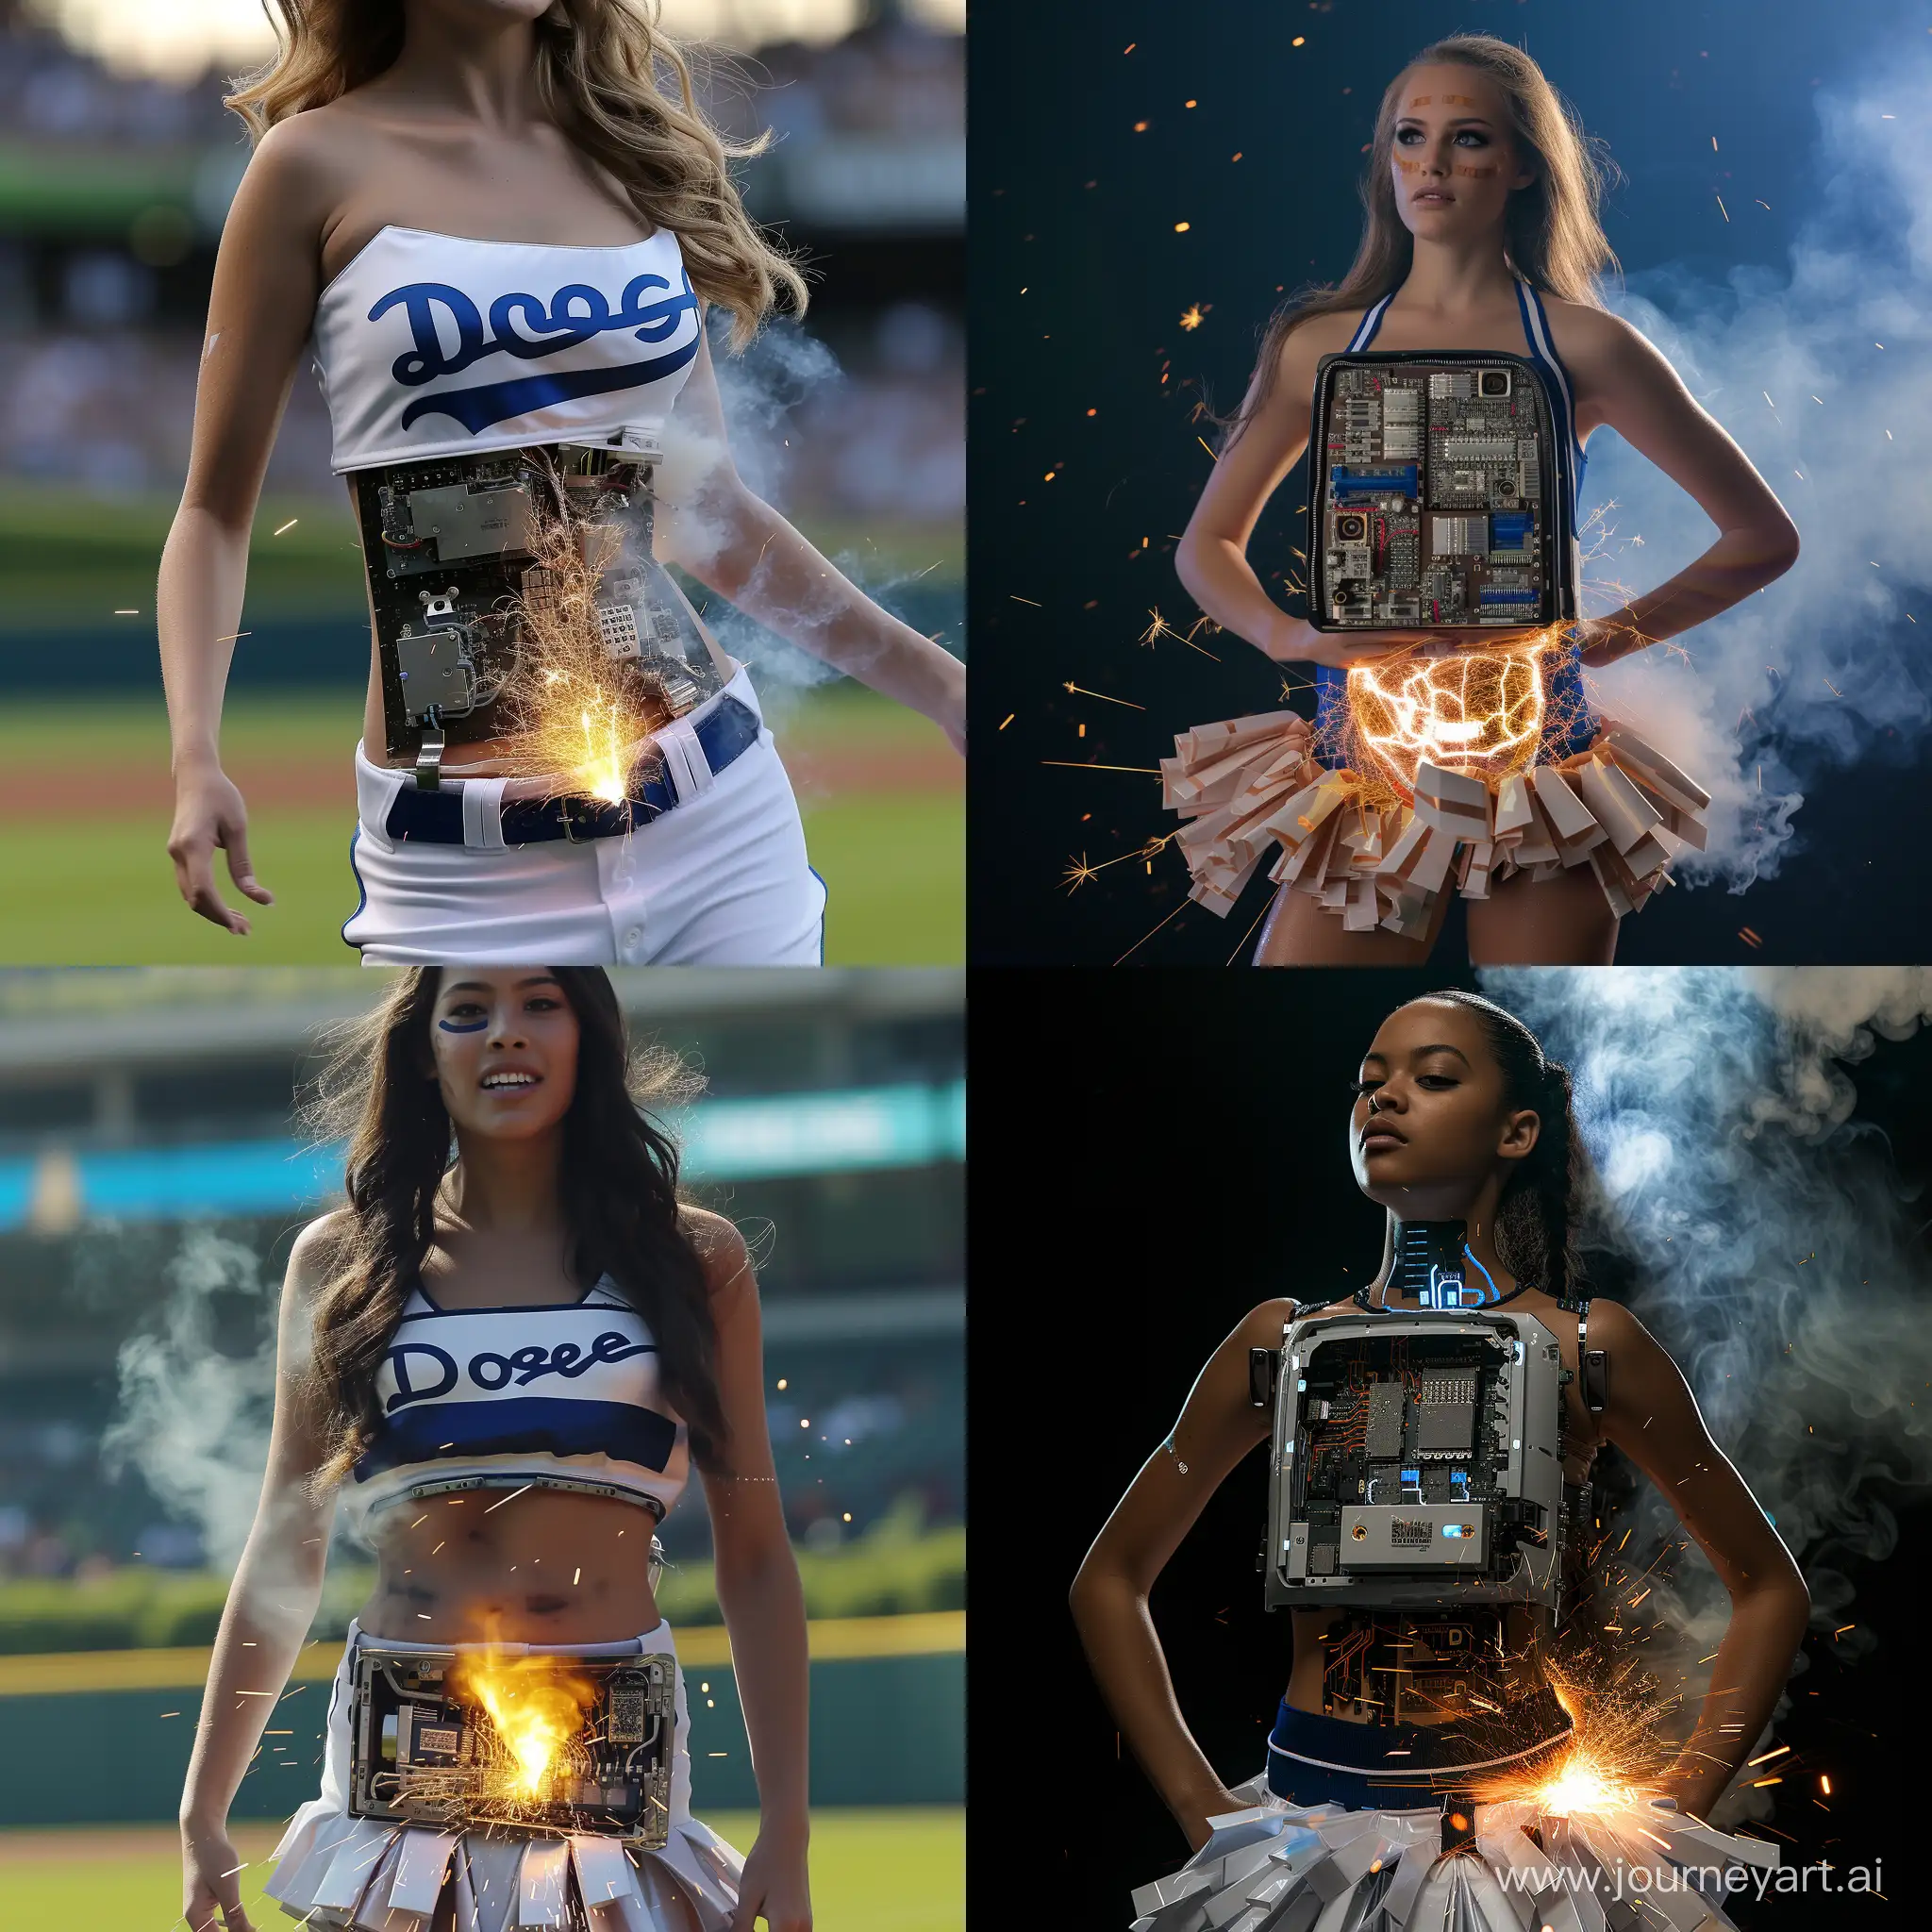 Malfunctioning-1314-Year-Old-Dodgers-Cheerleader-Robot-with-Exposed-Circuits